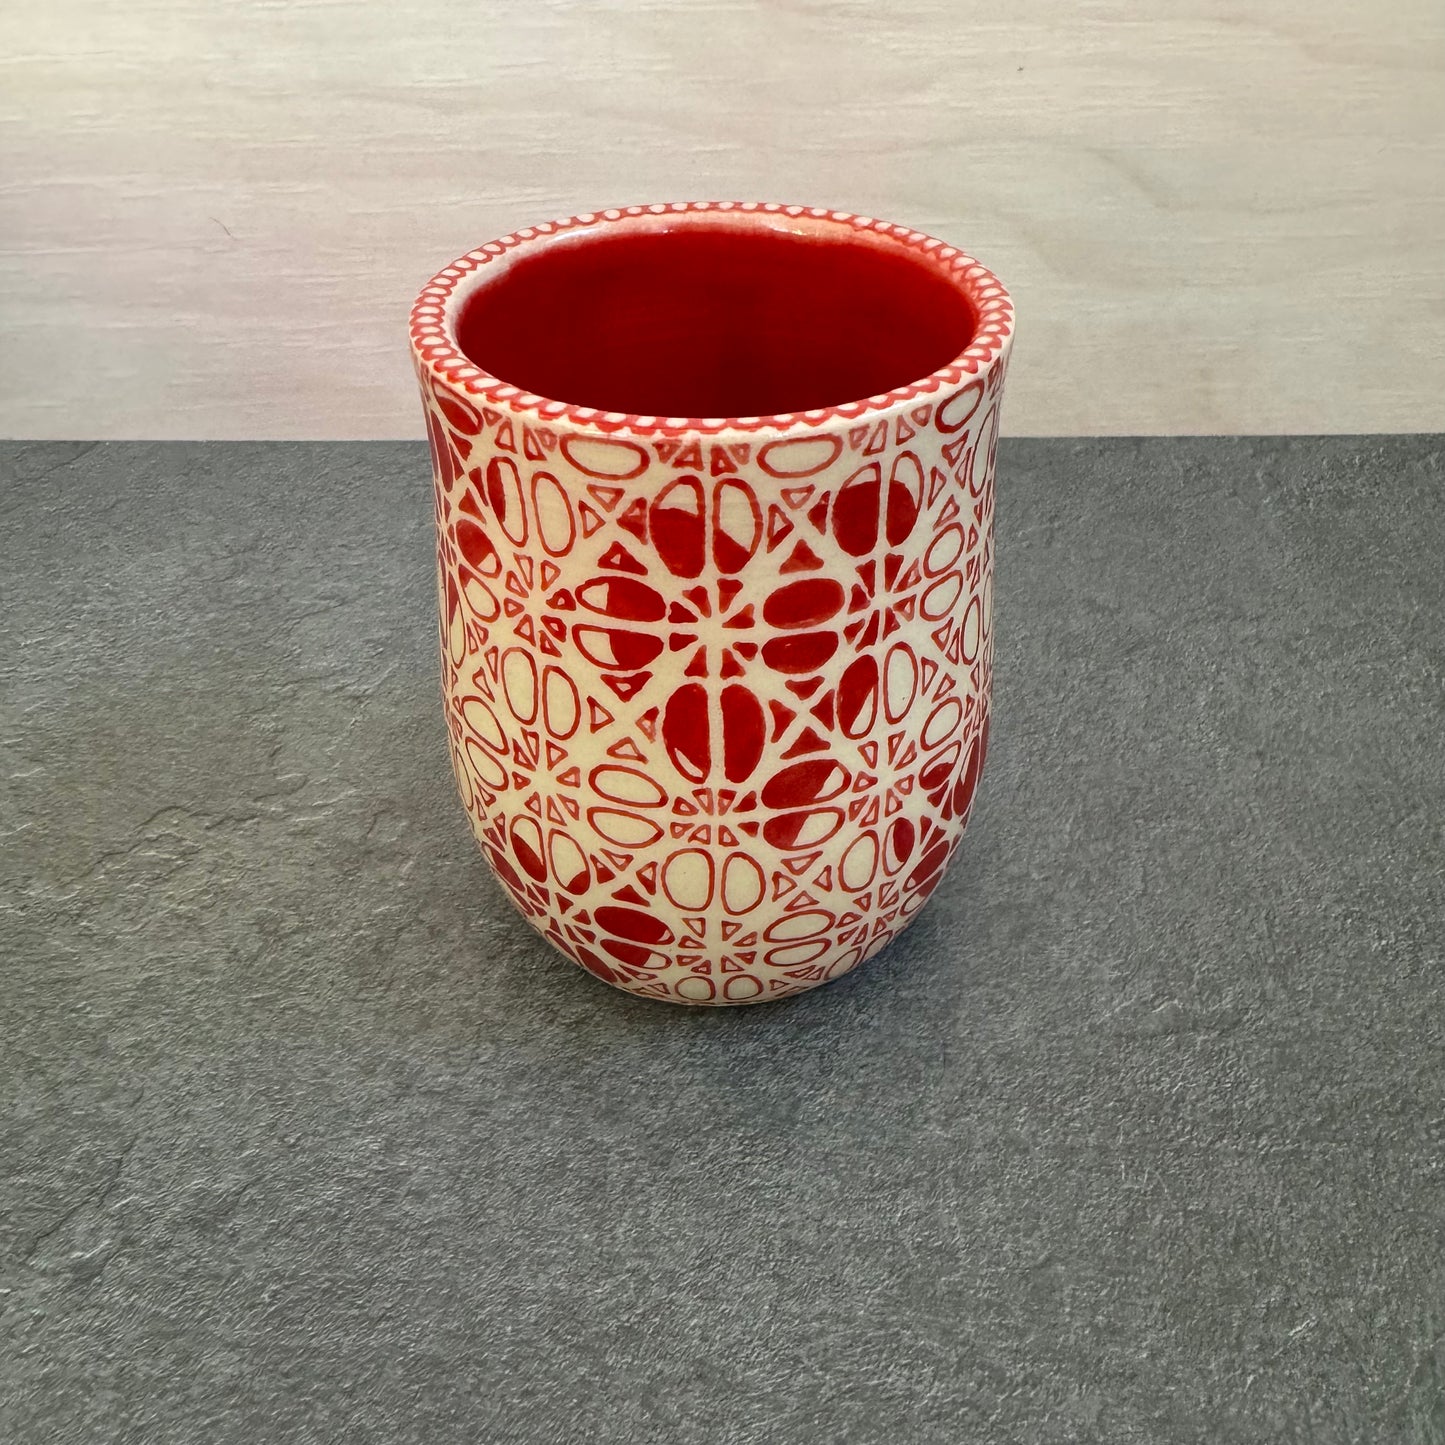 SECOND - Round Red Cup with Heart design